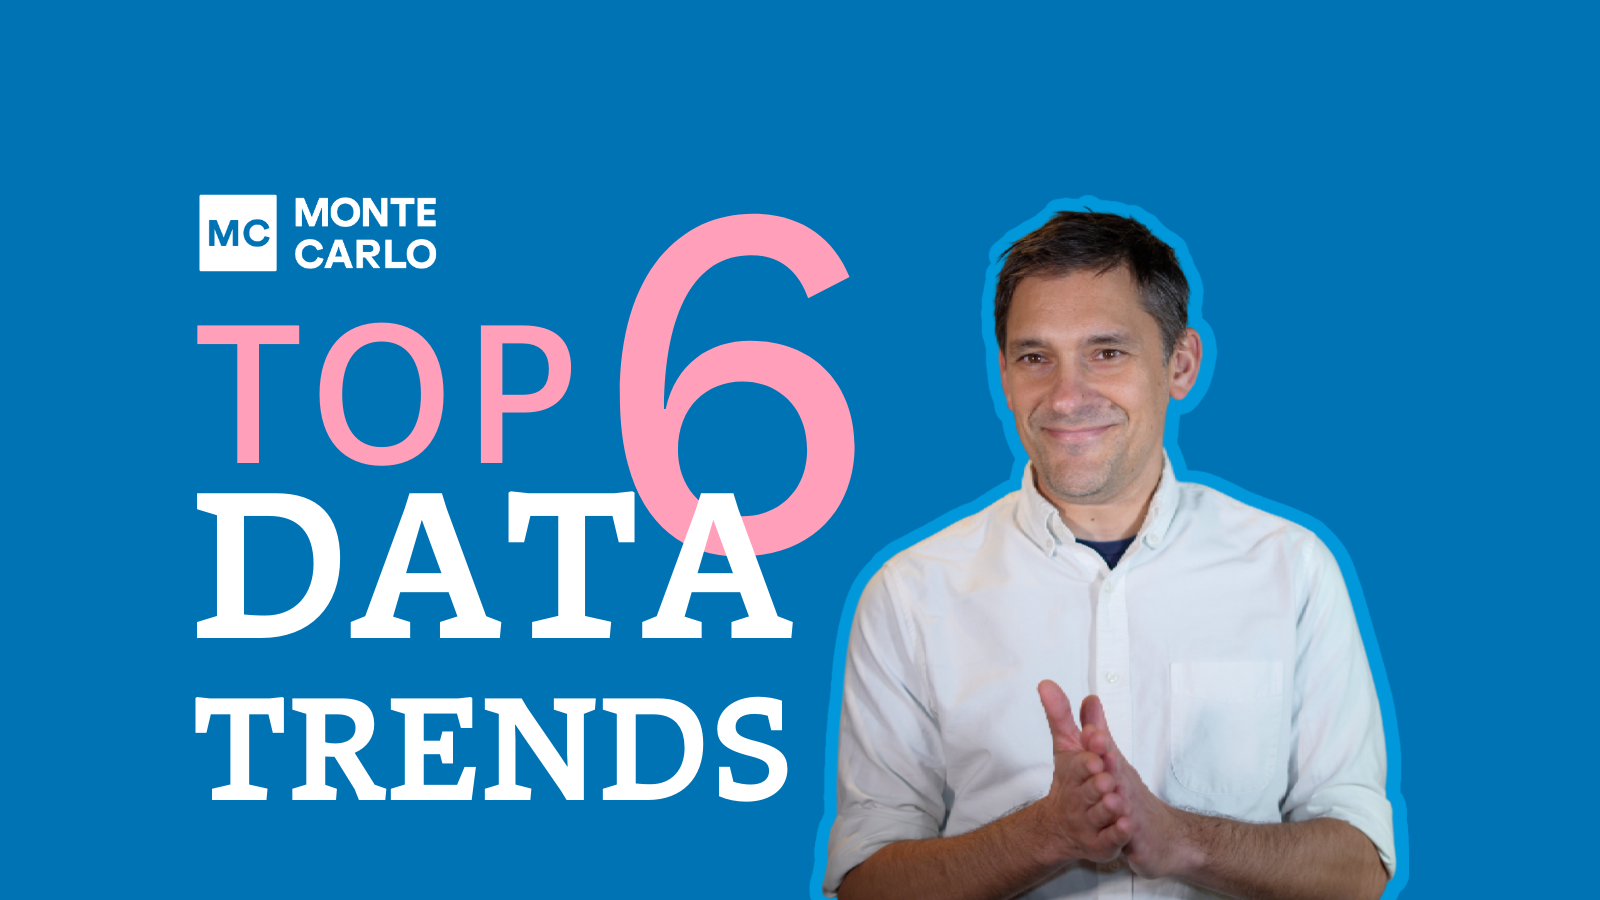 The Top 6 Data Trends in 2023